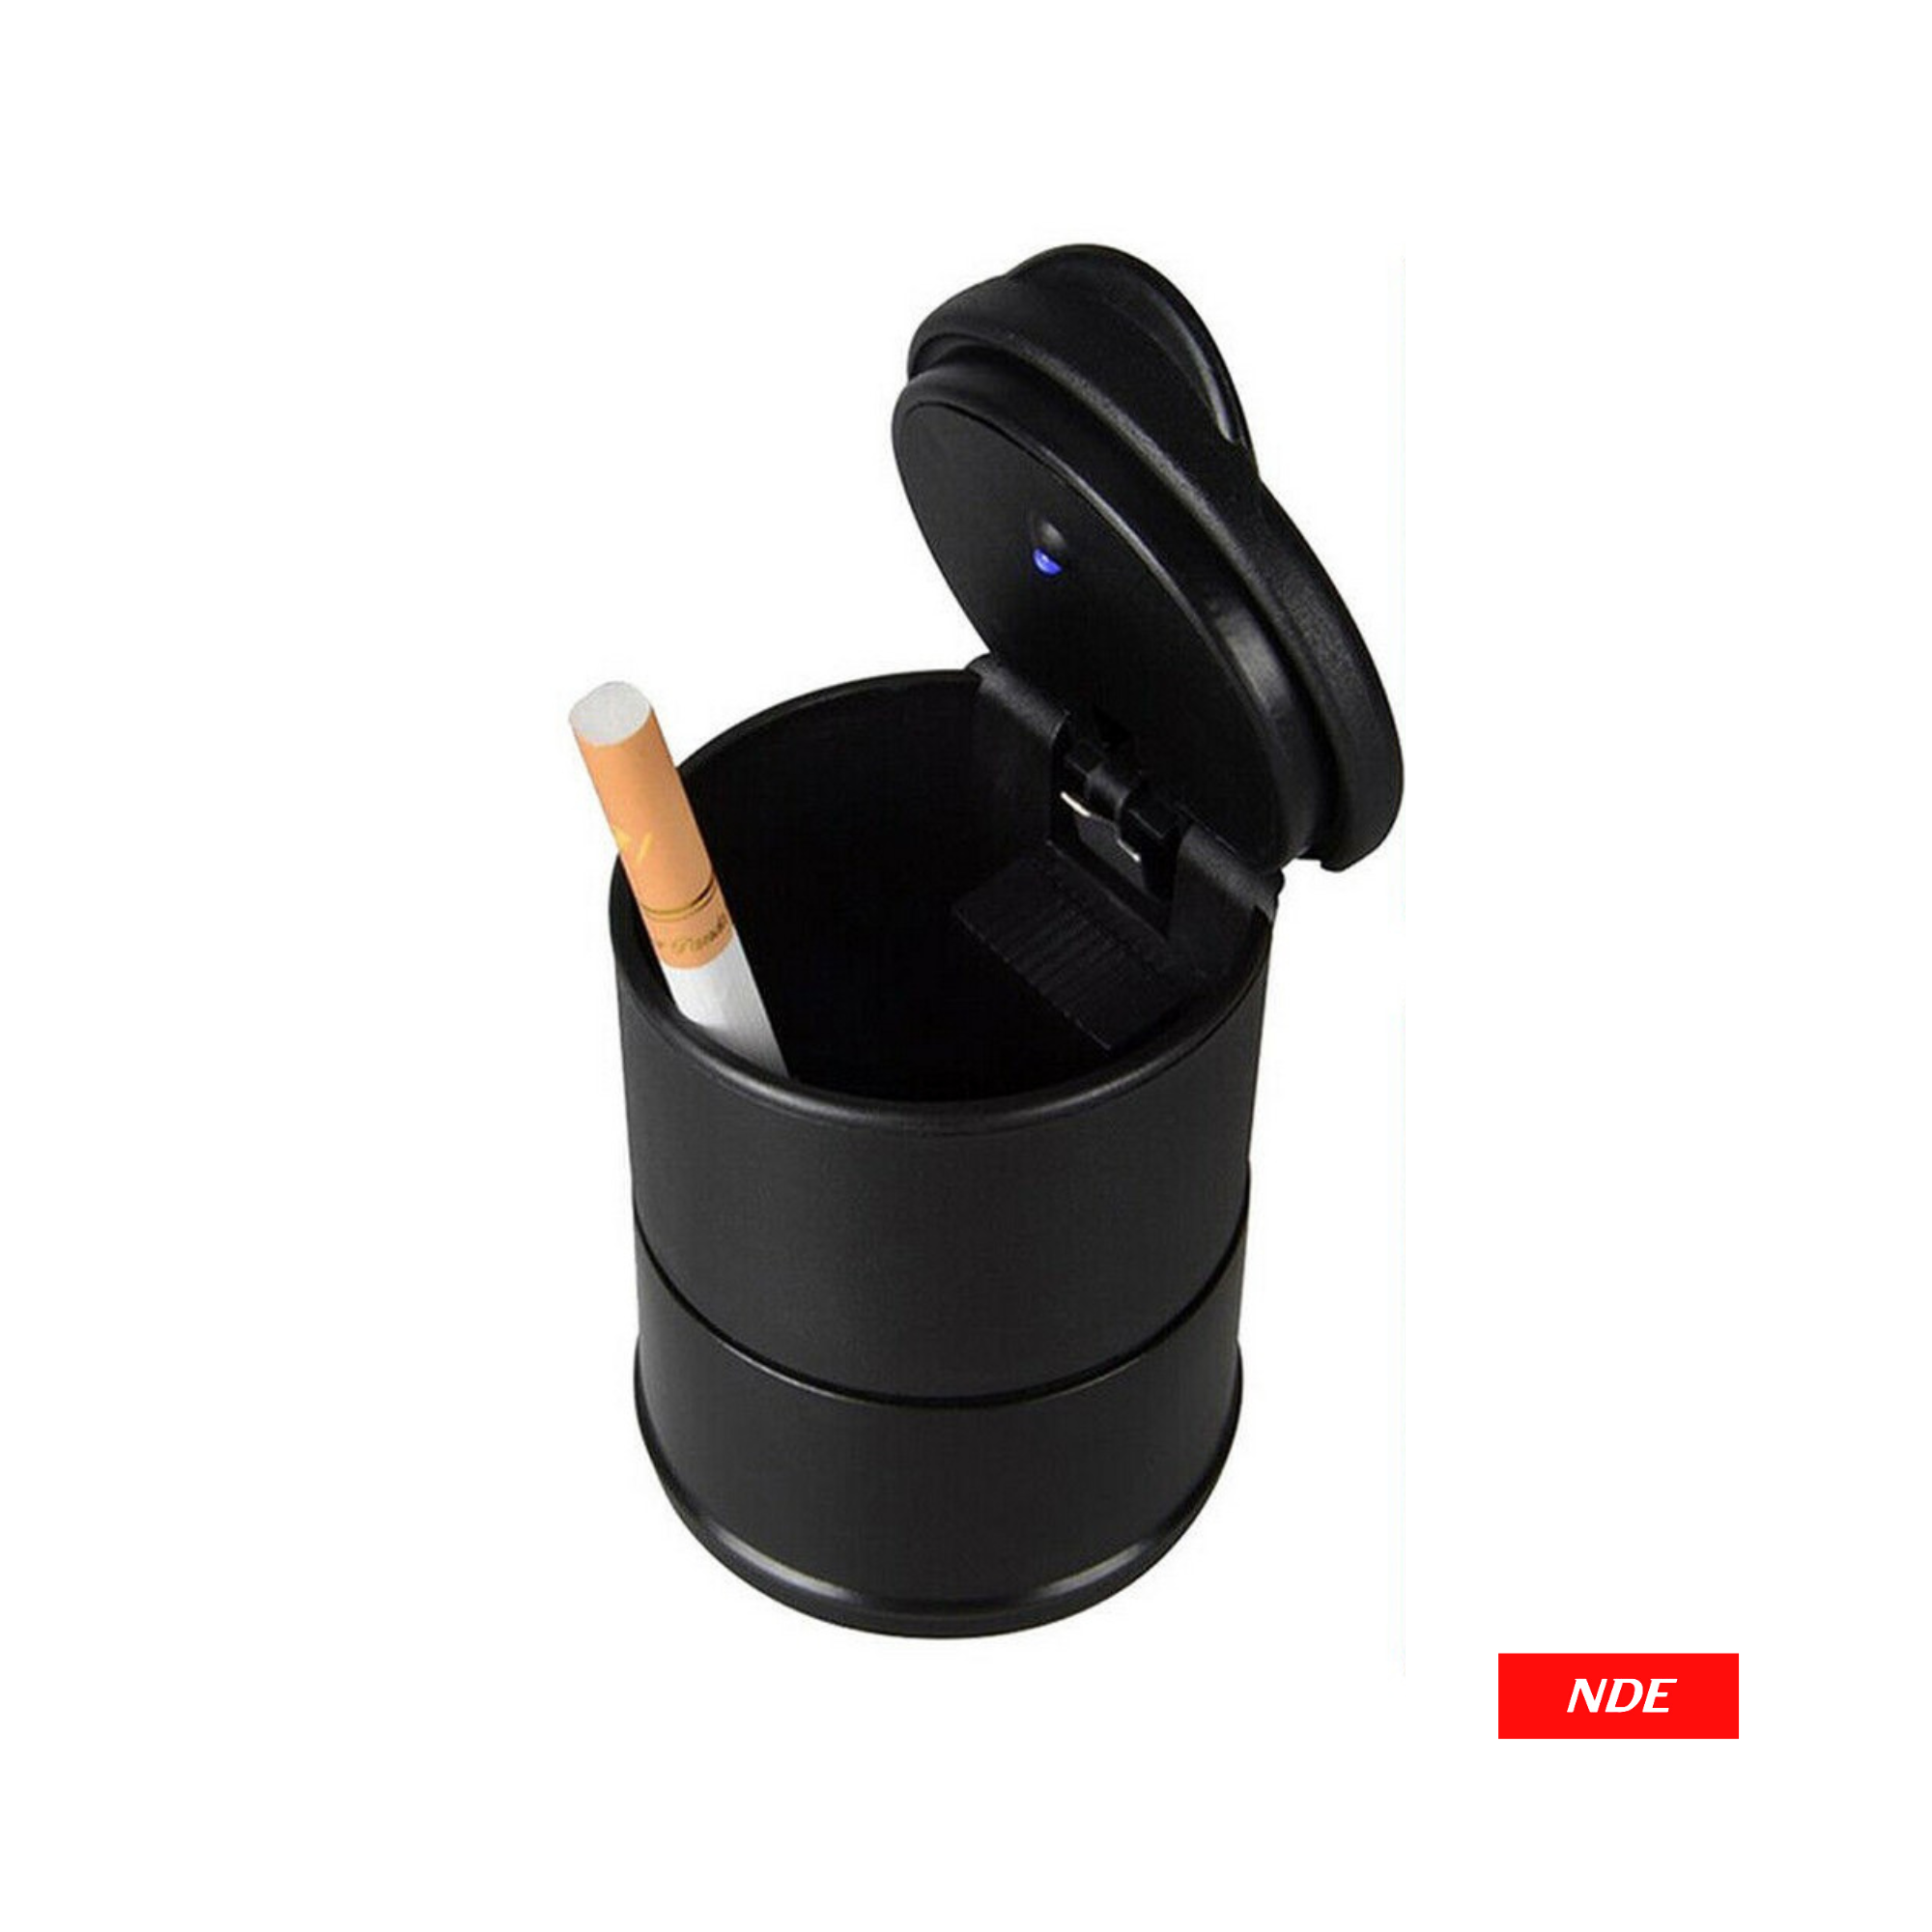 PORTABLE ASH TRAY CONTAINER FOR INDOOR USE